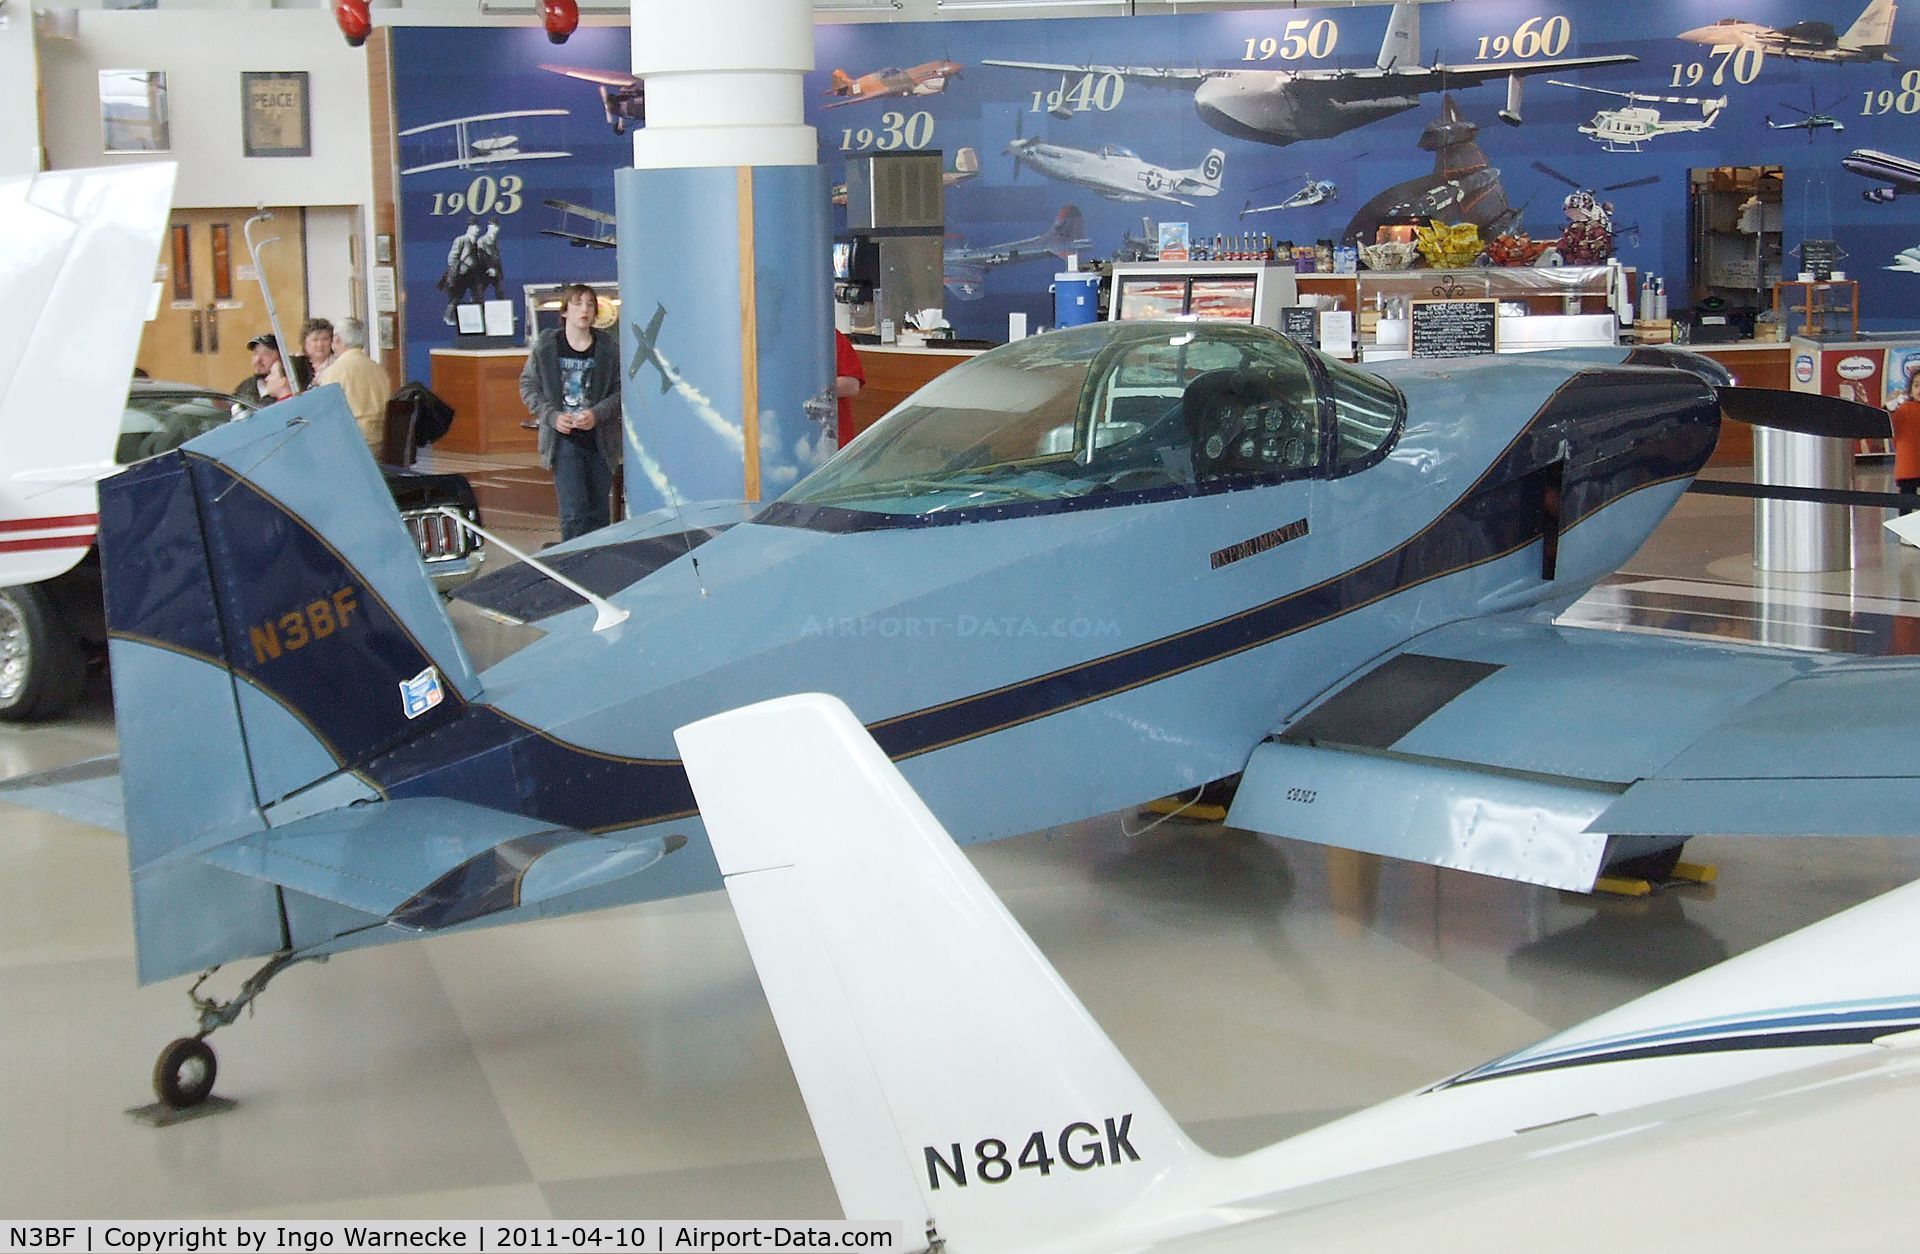 N3BF, 1980 Thorp T-18 Tiger C/N 413, Thorp (R.G. Furrer) T-18 at the Evergreen Aviation & Space Museum, McMinnville OR